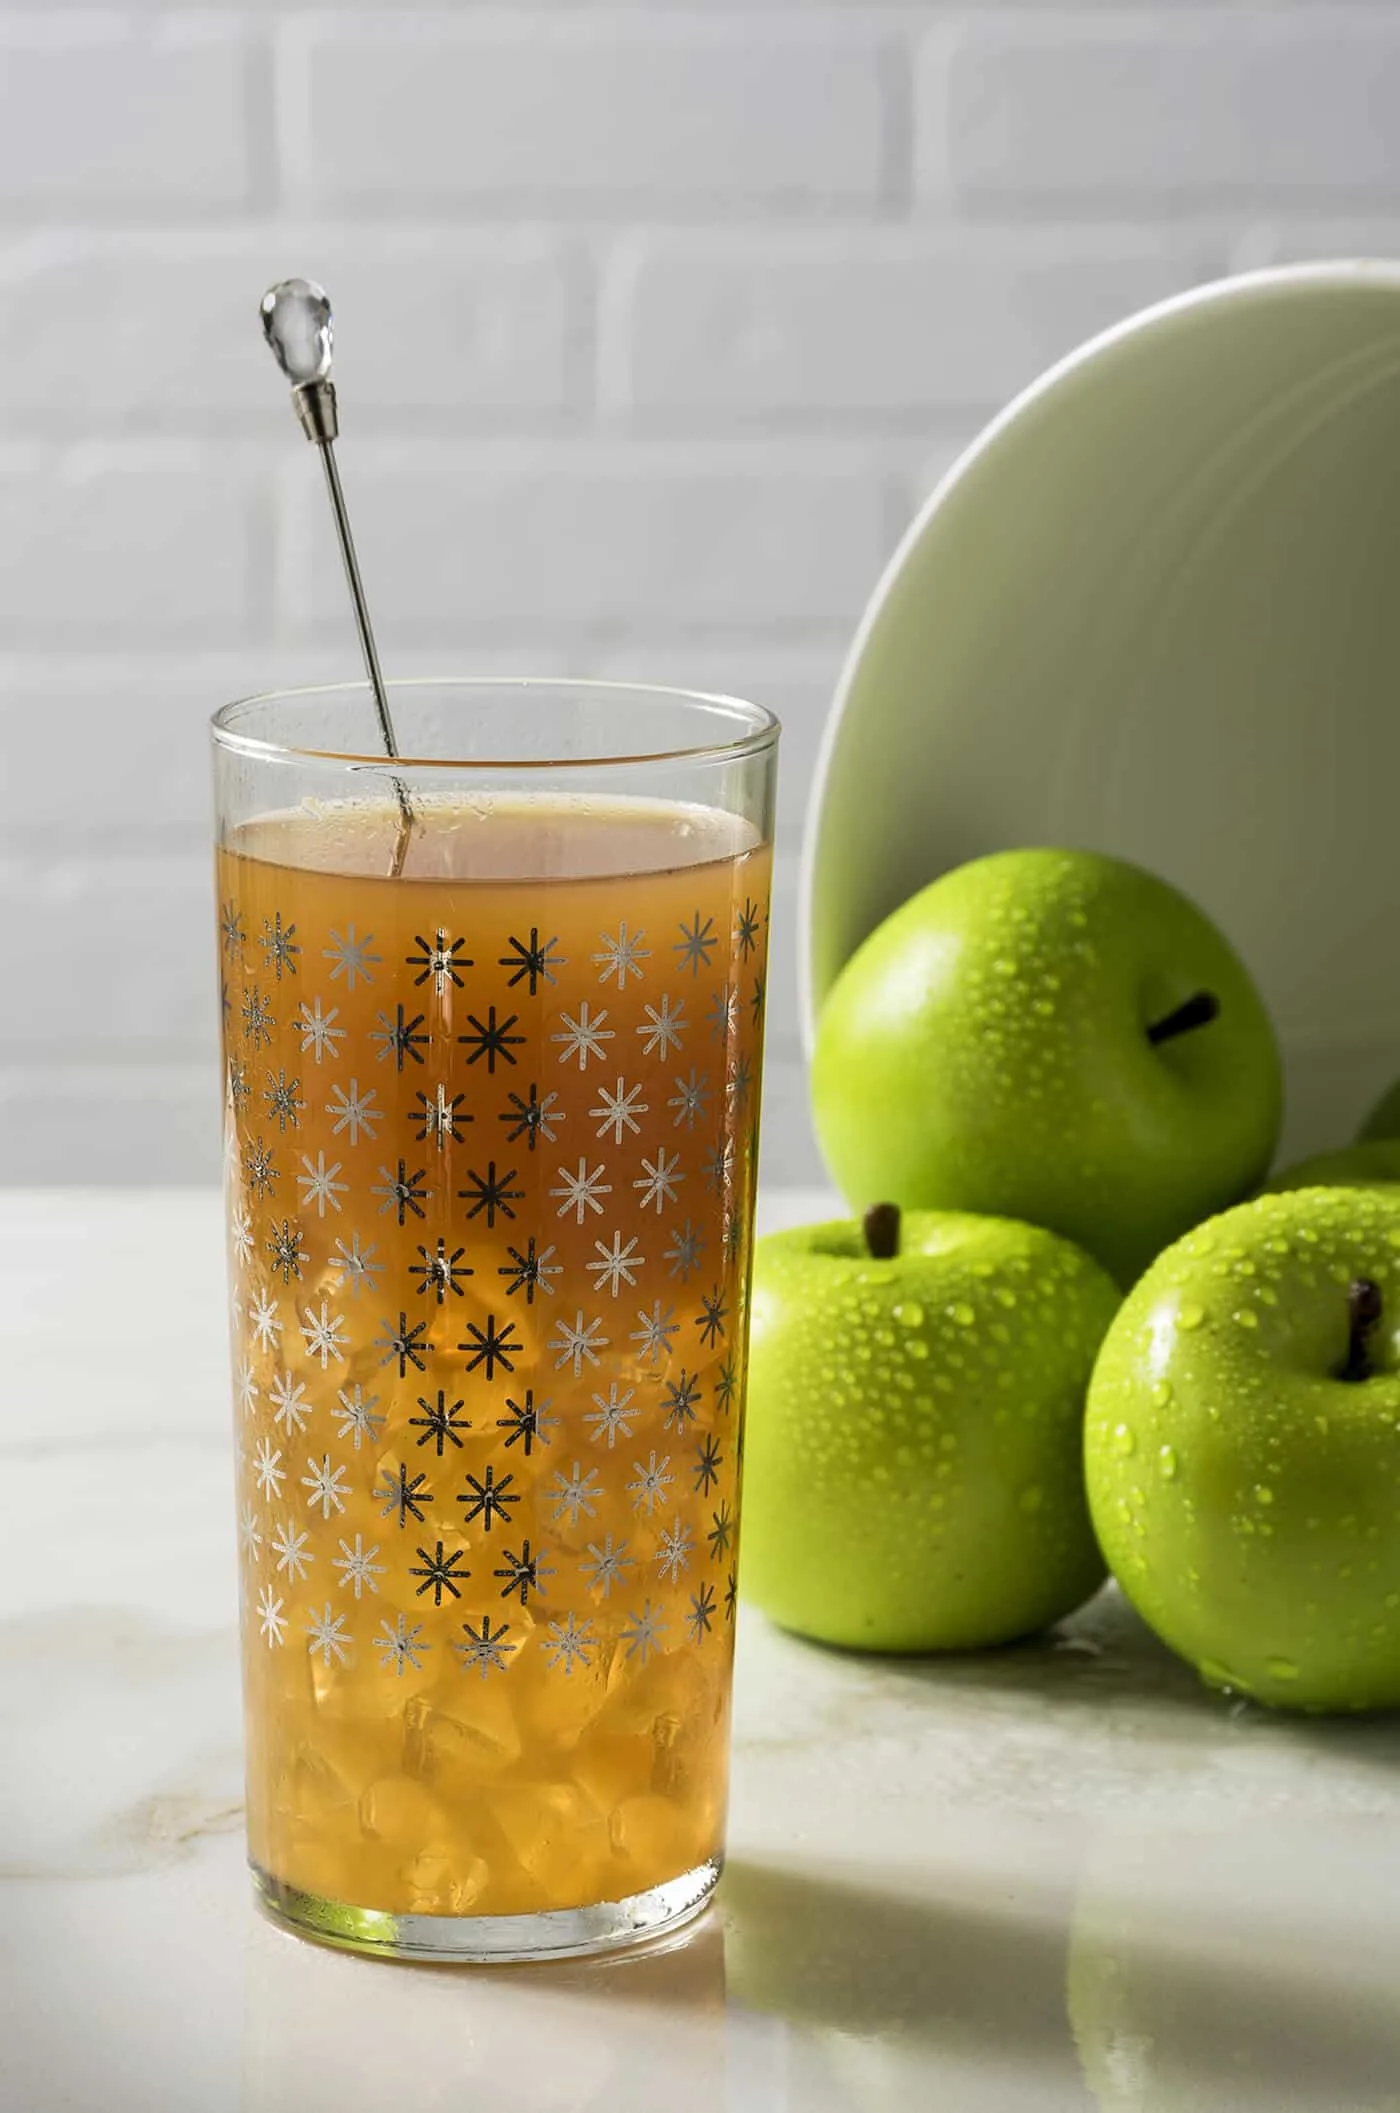 Create a delicious apple pie cocktail with Great America Malt Specialty, apple cider, and salted caramel vodka! Such a perfect mixed drink for fall.